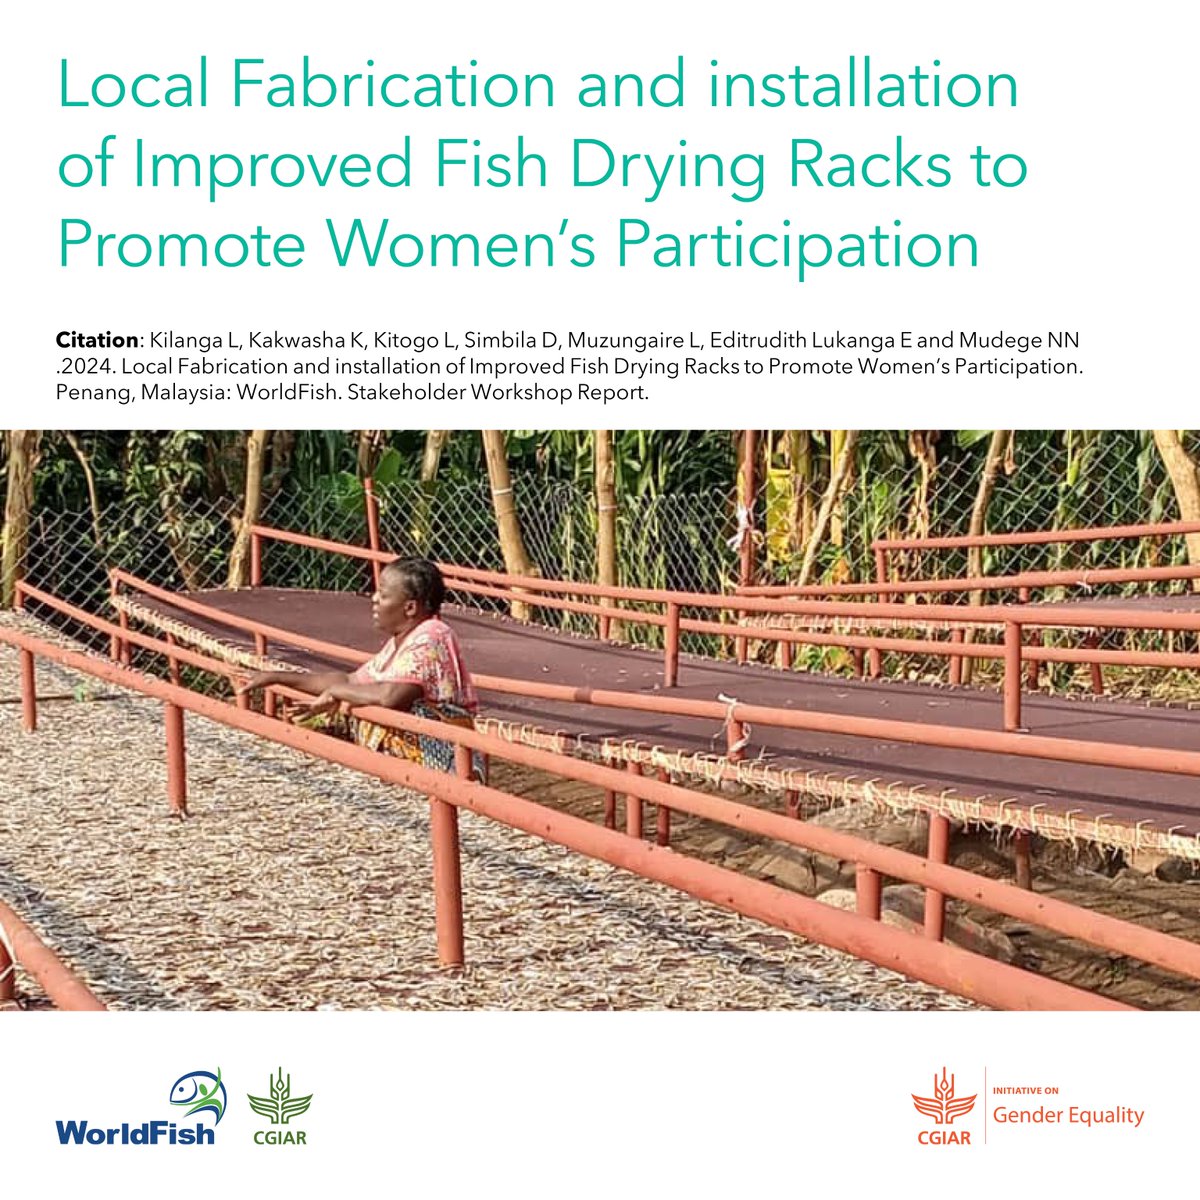 📕 Discover how locally fabricated fish drying racks empower women processors, boosting their resilience to climate-induced economic challenges. 👉 tinyurl.com/WFPub2404s #AquaticFoods @CGIARgender @KeaganKakwasha, @EditrudithLuka1, @NetsayiMudege